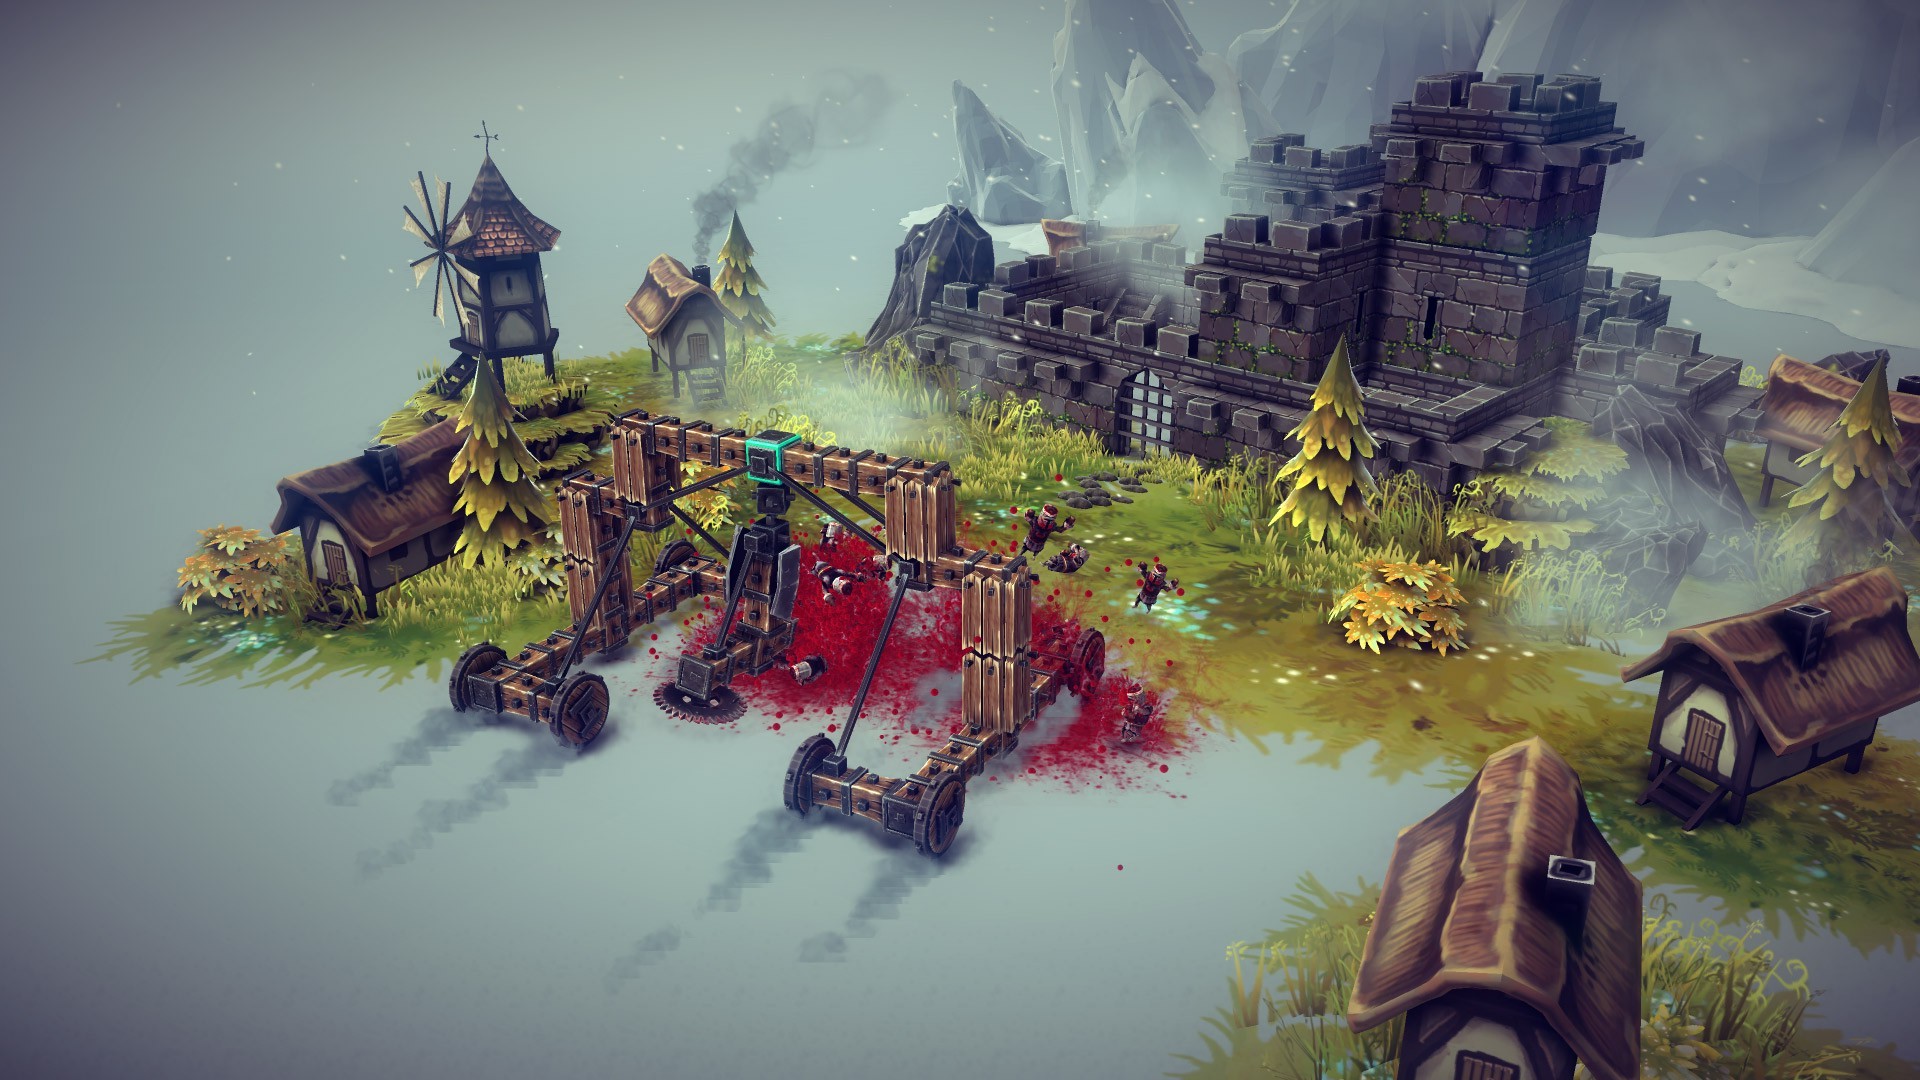 free download besiege mobile